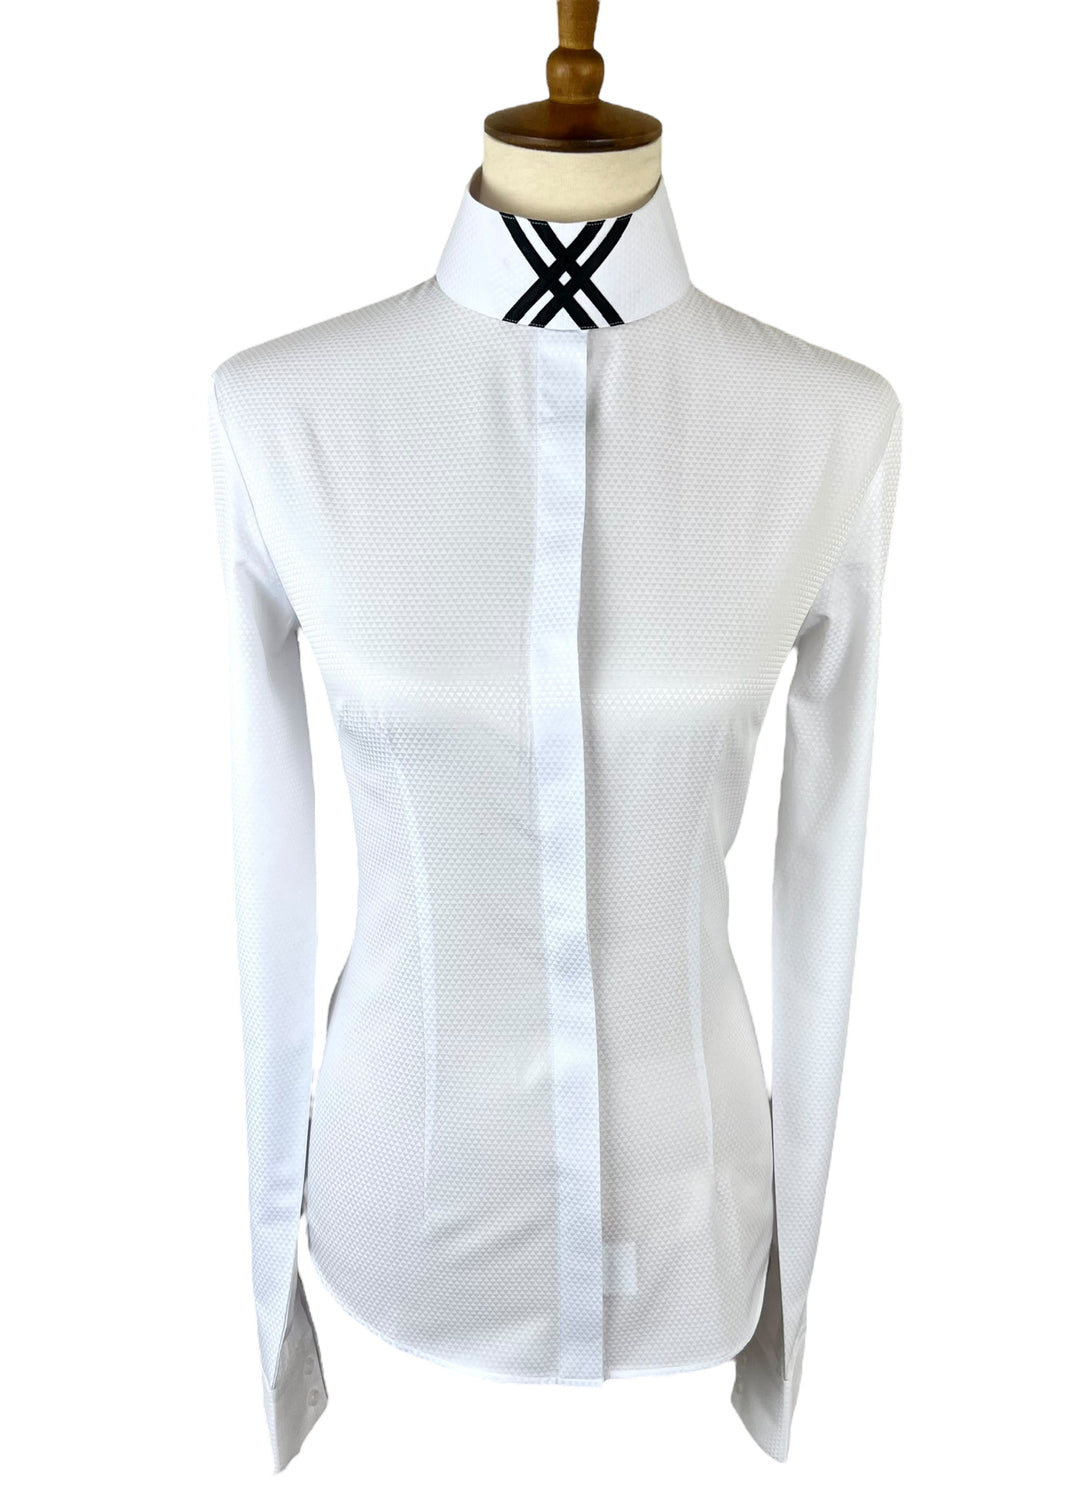 White Hunt Shirt with Black & Silver Accents (Size 34)